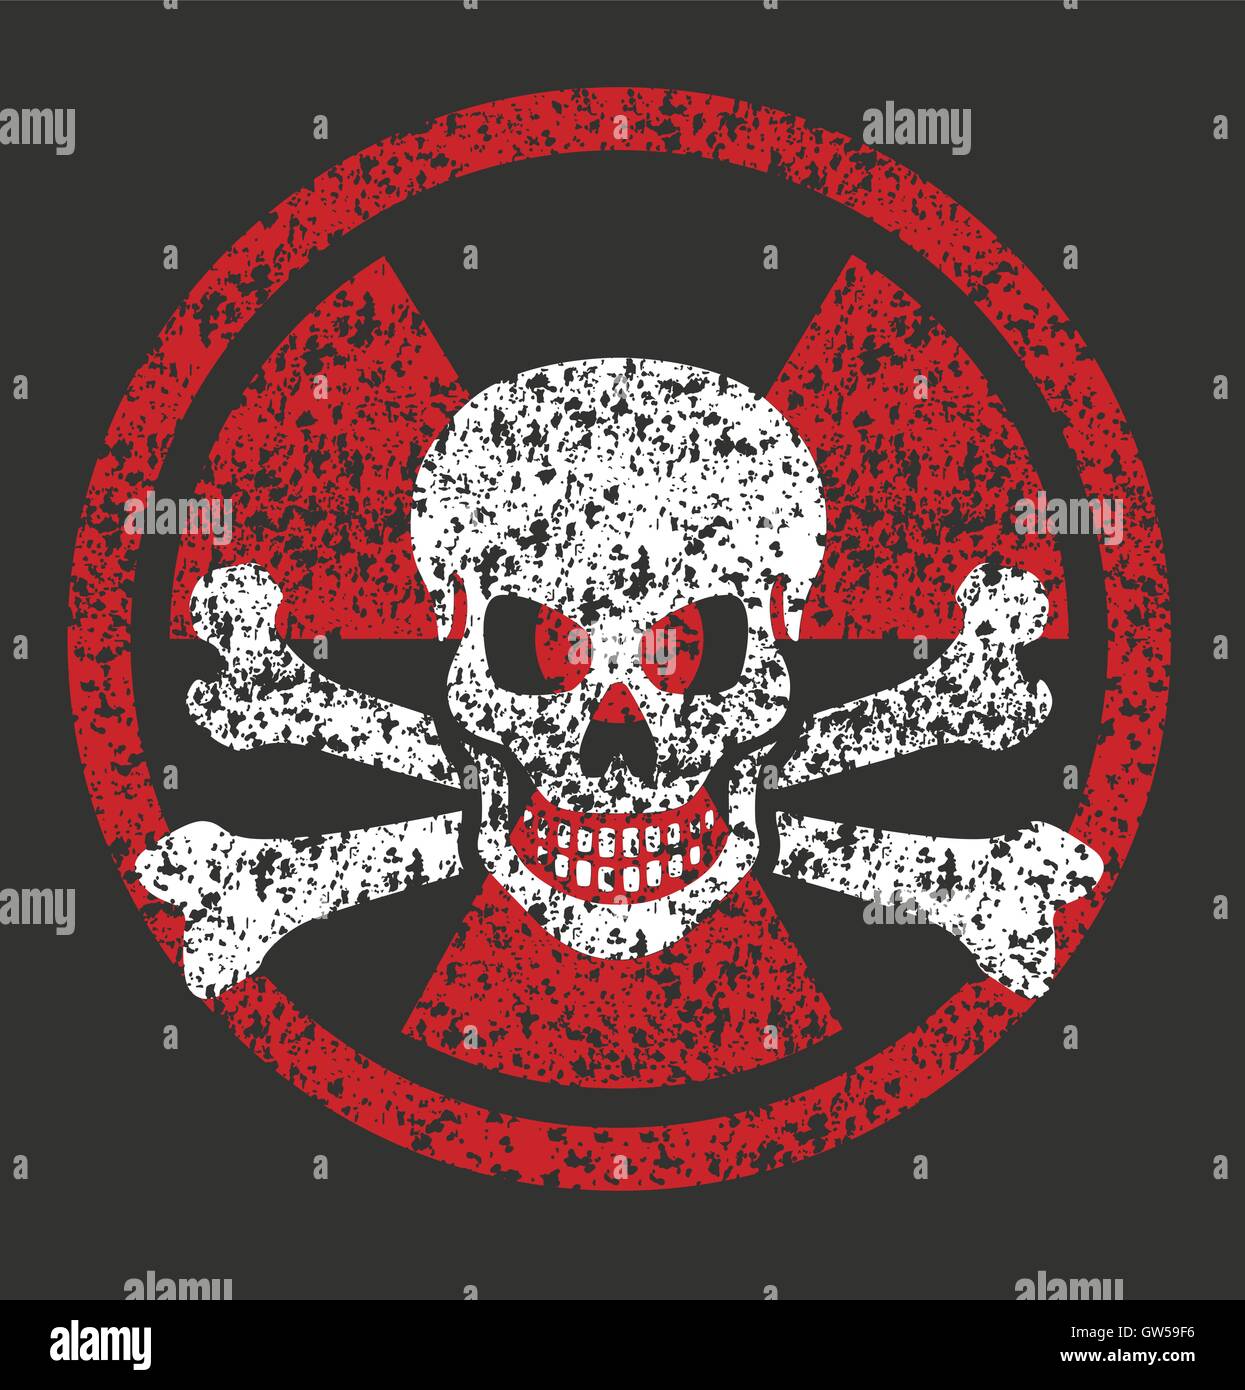 Nuclear Symbol With Skull And Crossbones Vector Design Features Rough Distressed Grunge